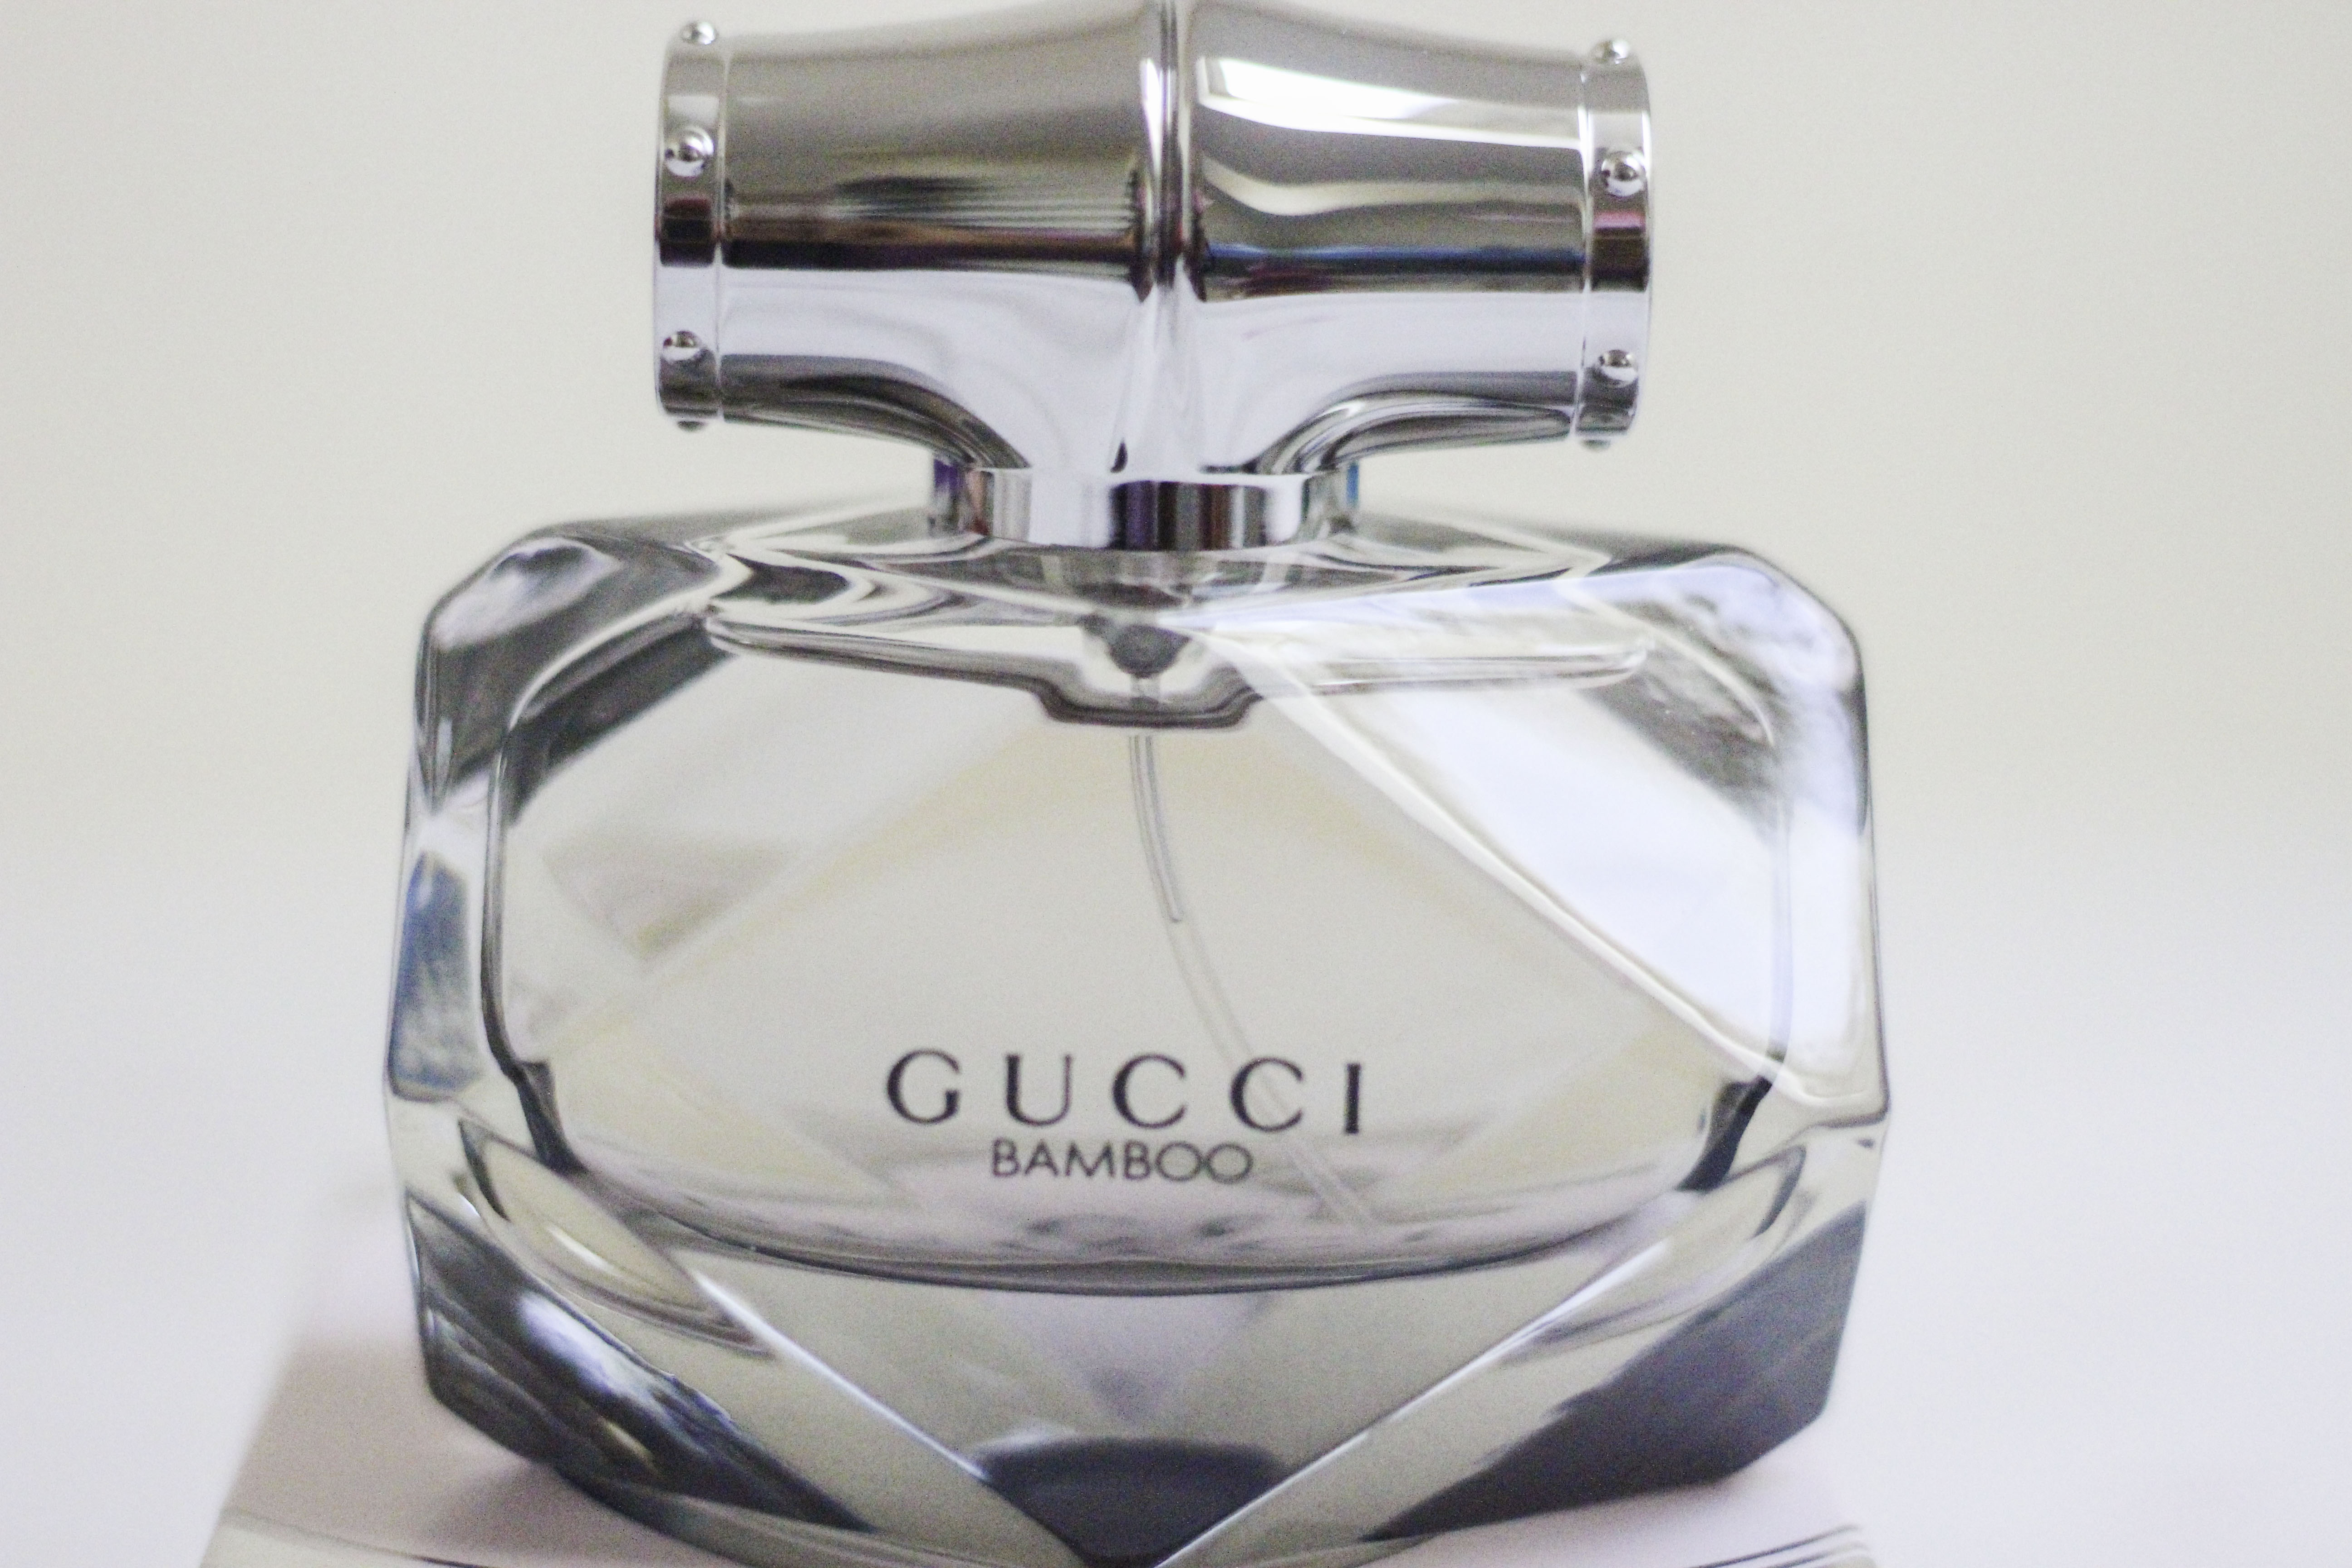 Product Review: Gucci Bamboo Eau de Parfum - fashionandstylepolice